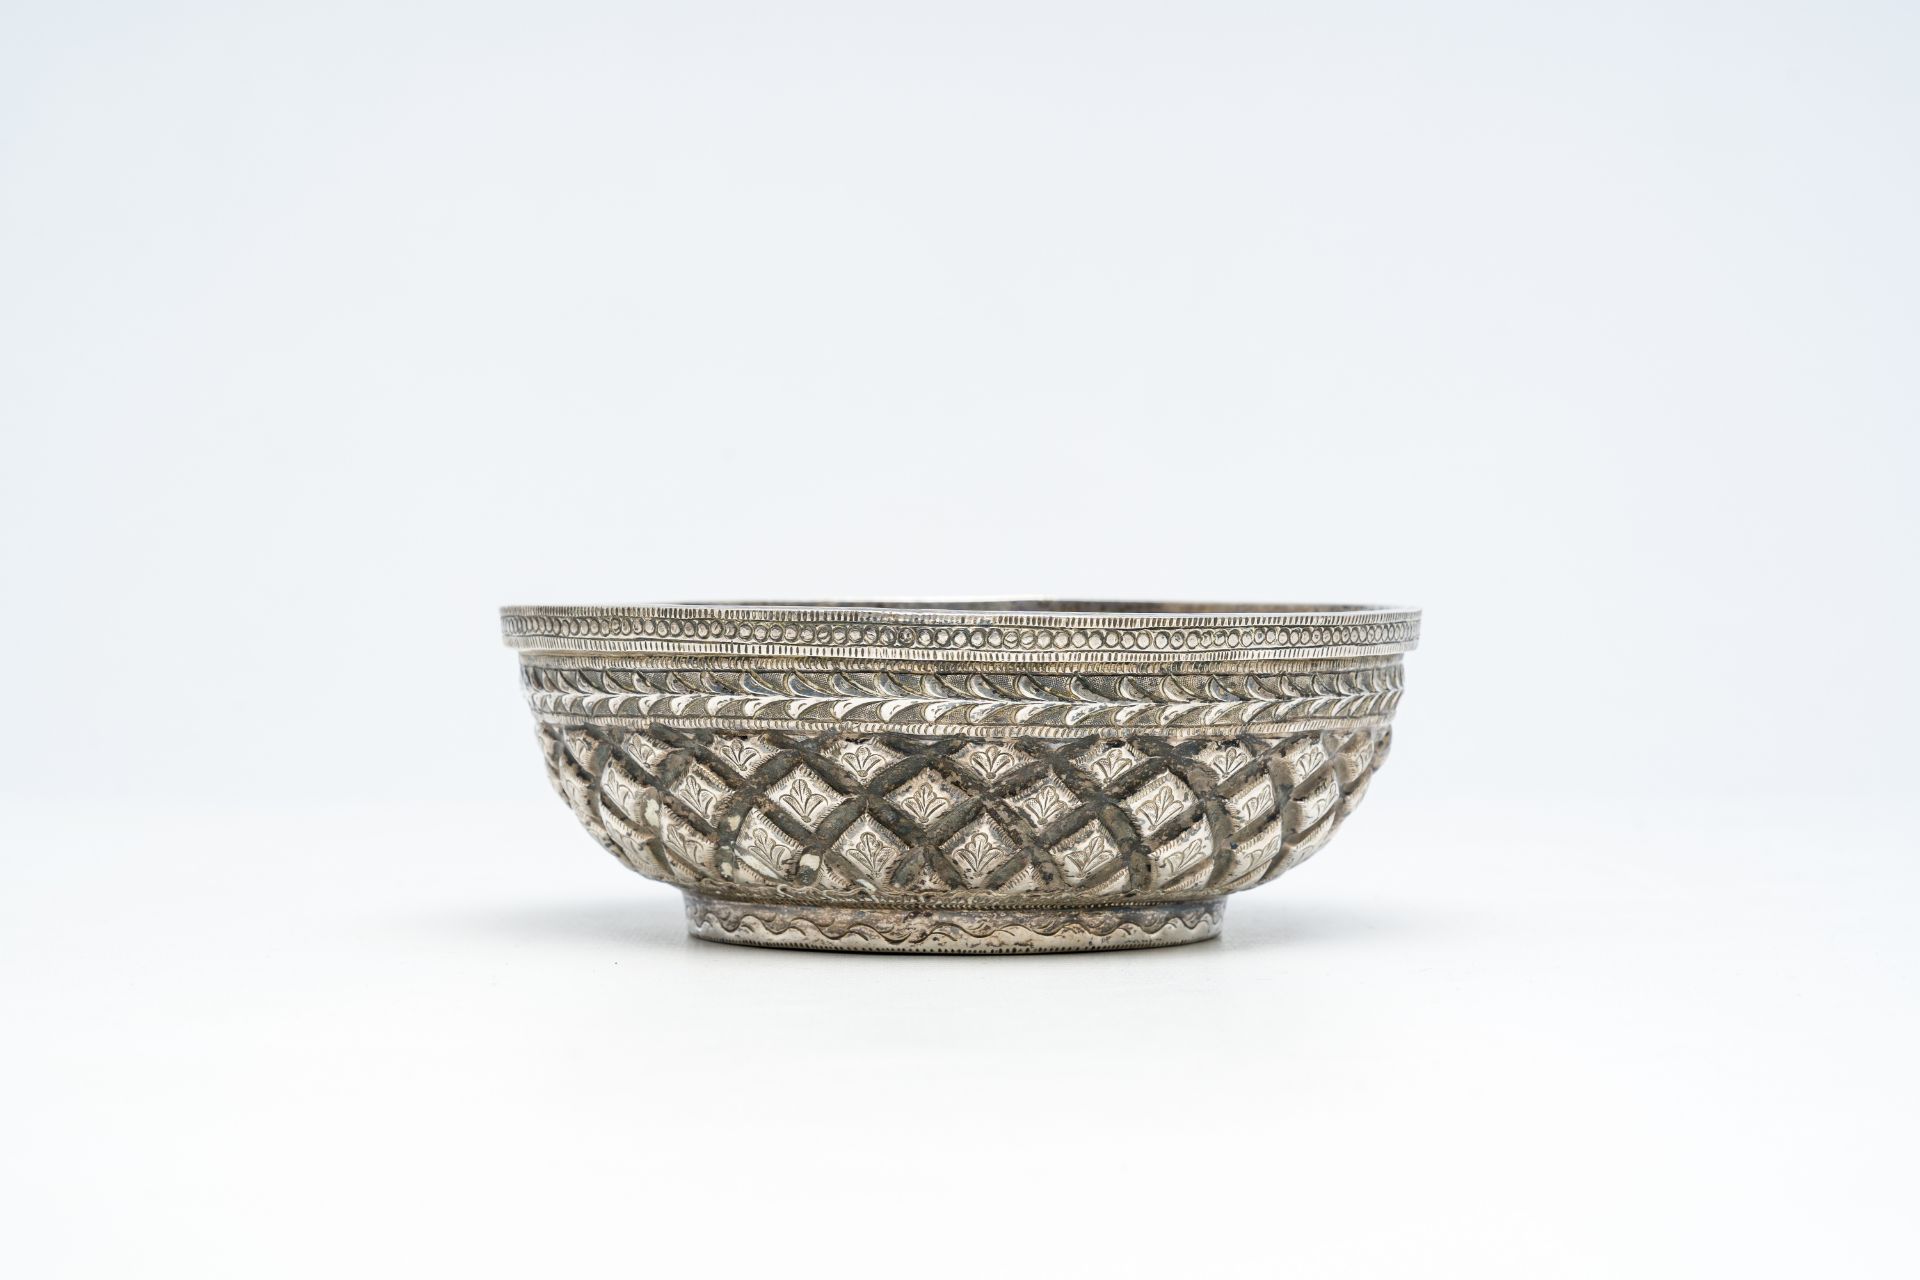 A Southeast Asian silver bowl, probably Laos or Sri Lanka, 19th/20th C. - Image 2 of 7